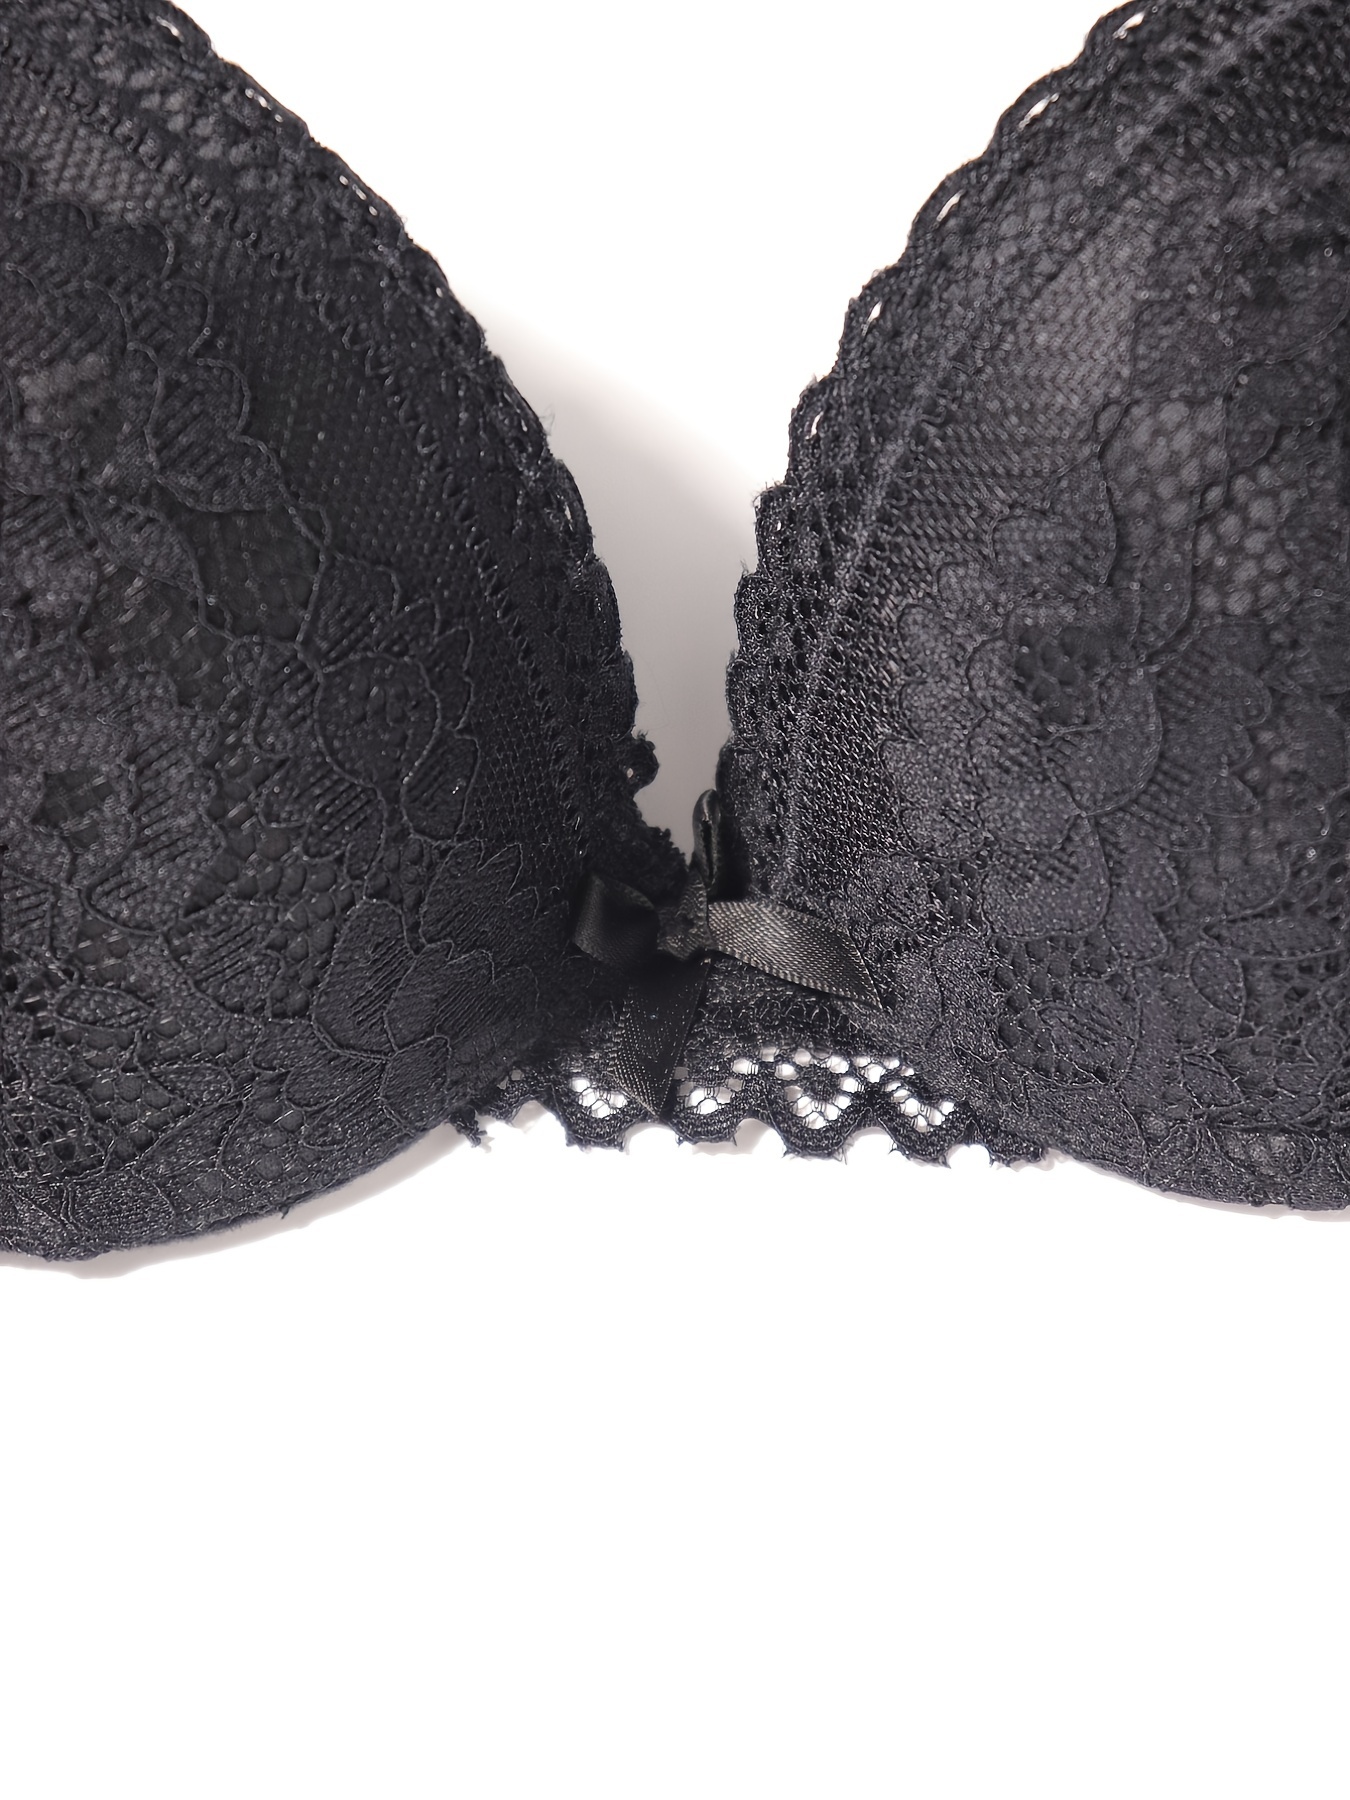 Bras Black Mesh Lace Women Embroidery Dropship Underwire Thin Sexy Lingerie  Push Up Floral 36D 38D 40D 42D 44D From Xiaofengbao, $11.71